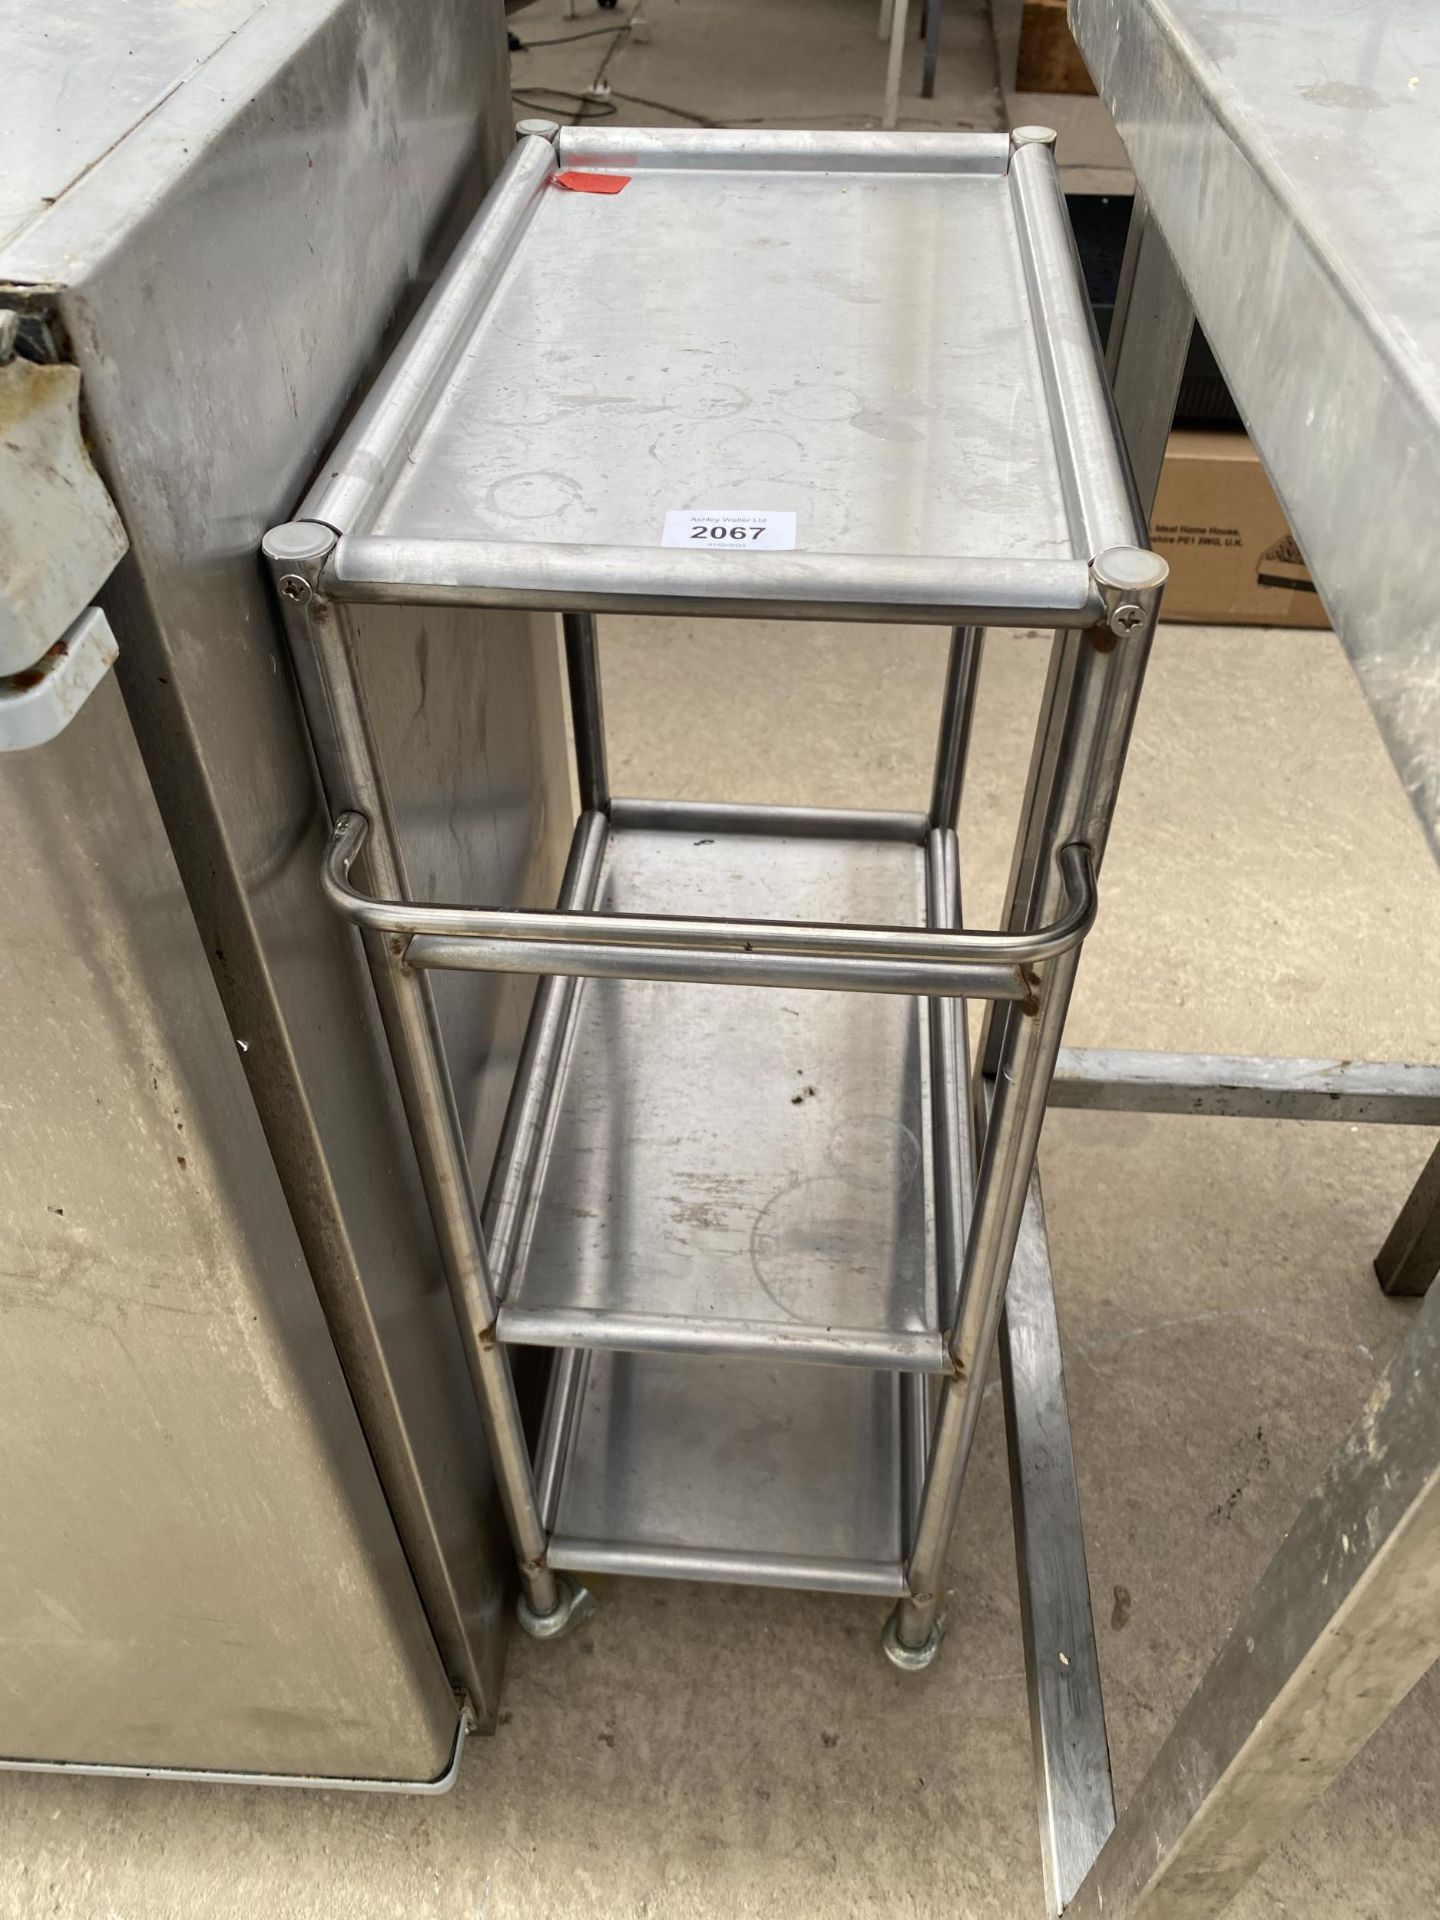 A SMALL THREE TIER STAINLESS STEEL TROLLEY